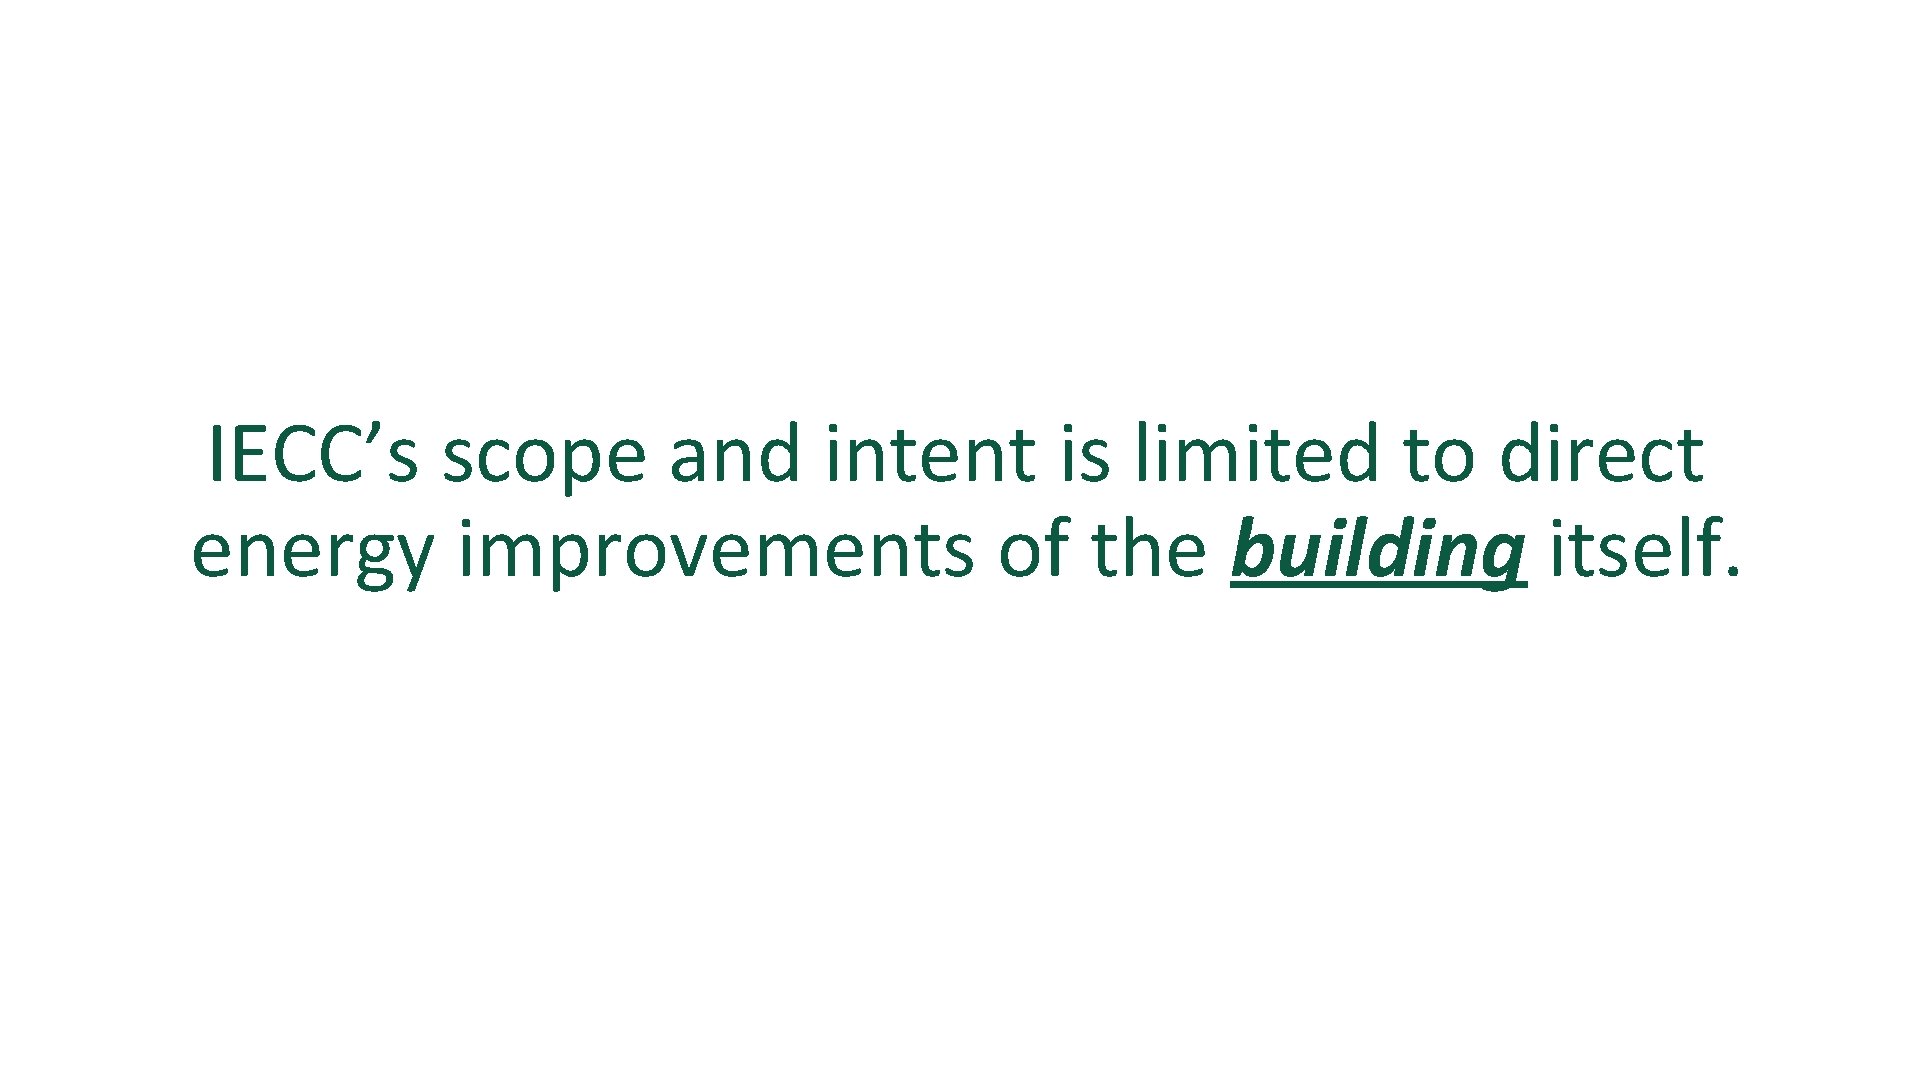 IECC’s scope and intent is limited to direct energy improvements of the building itself.